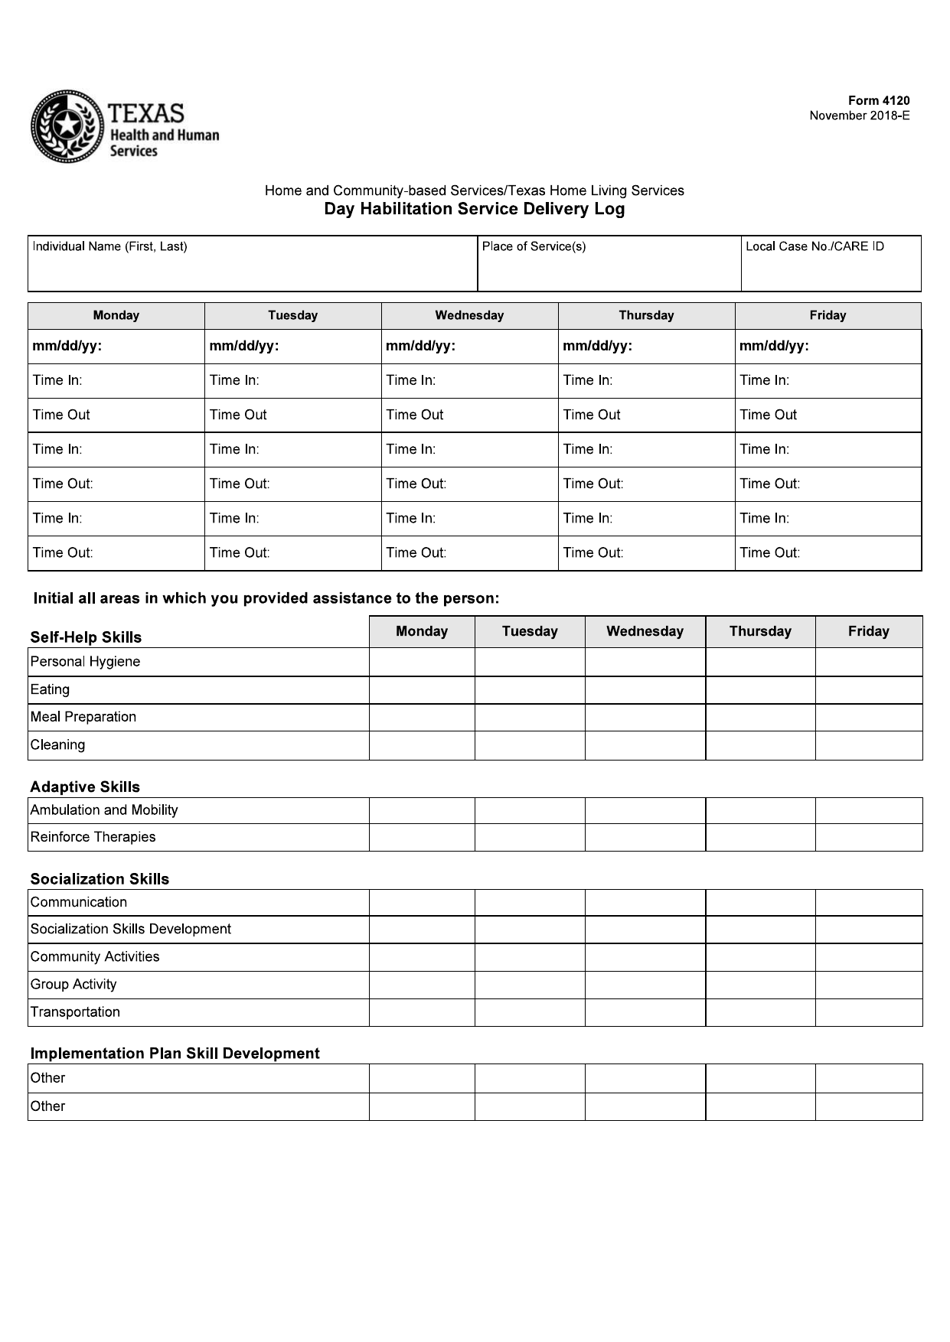 Form 4120 Day Habilitation Service Delivery Log - Texas, Page 1